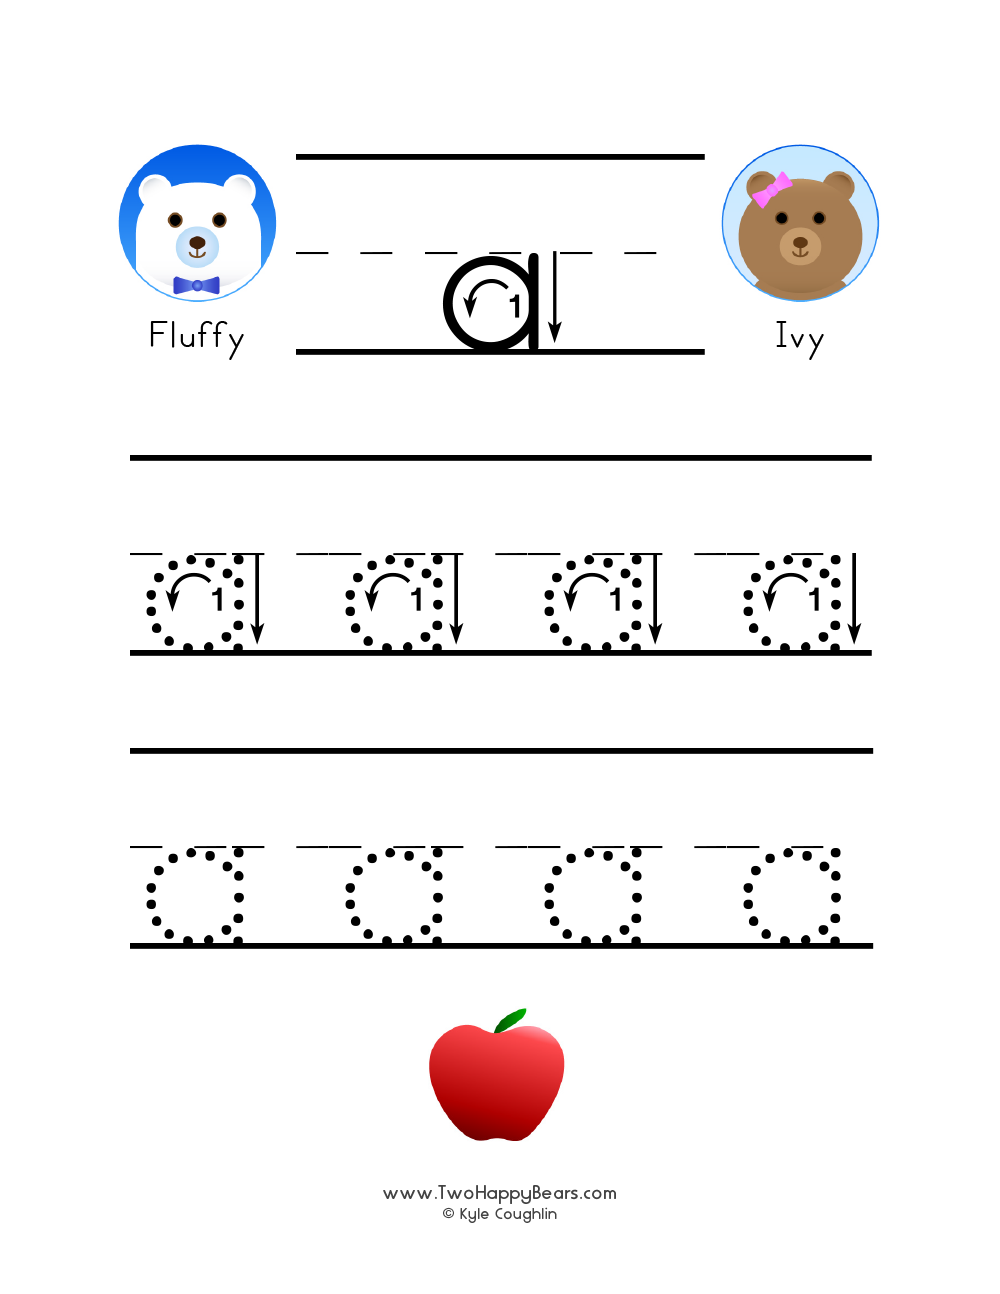 Free printables that feature every letter of the alphabet, helping children memorize alphabetical order.